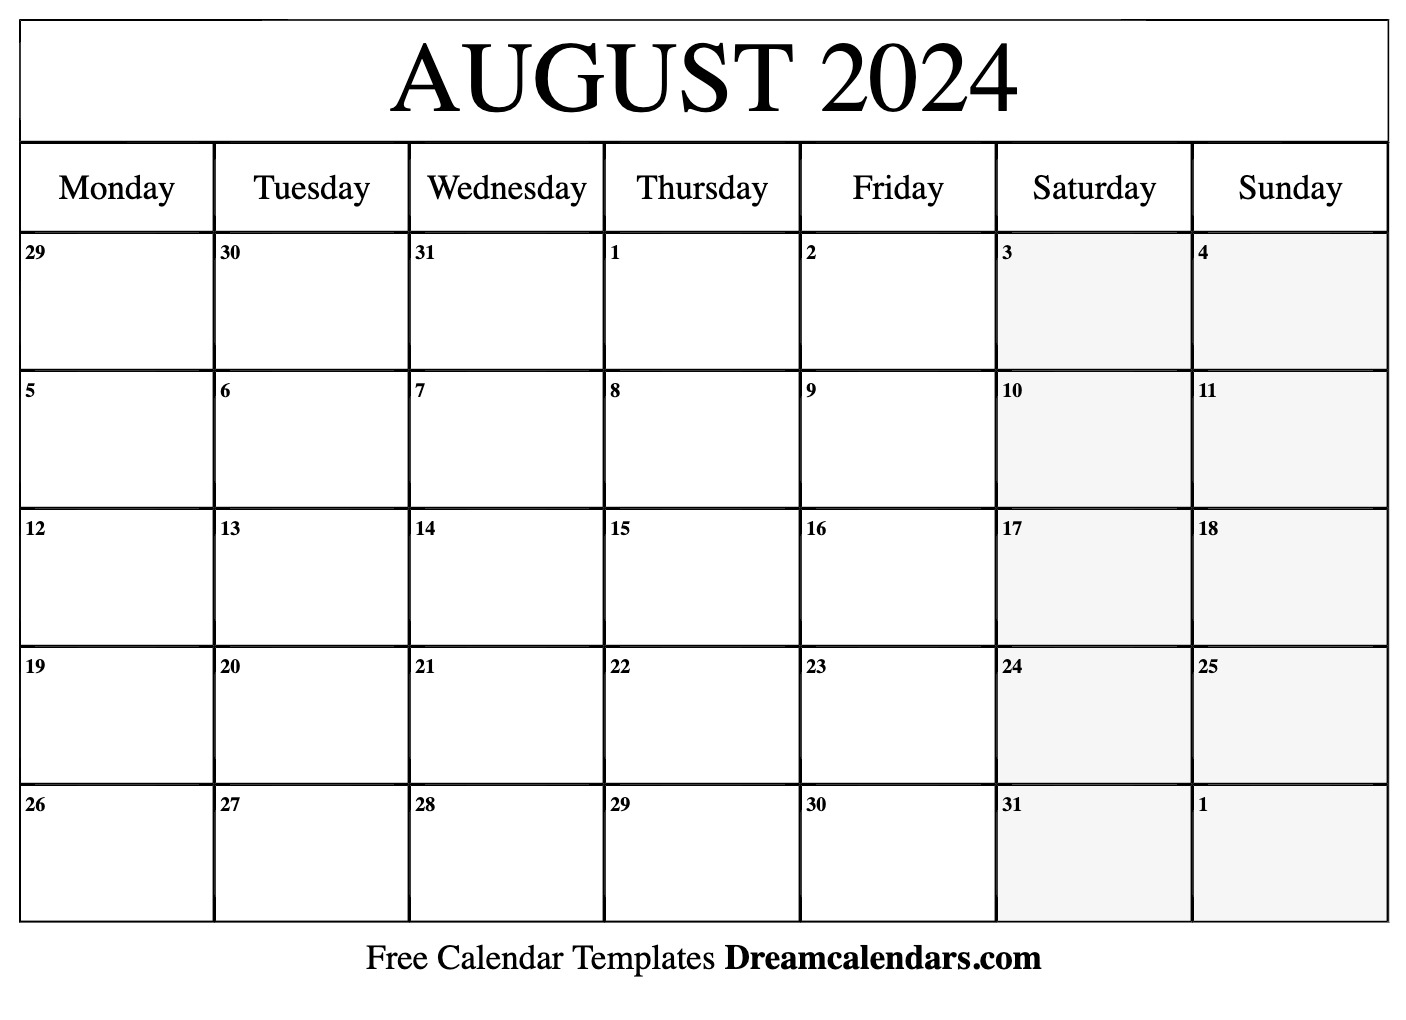 August 2024 Calendar | Free Blank Printable With Holidays for June July August 2024 Printable Calendar